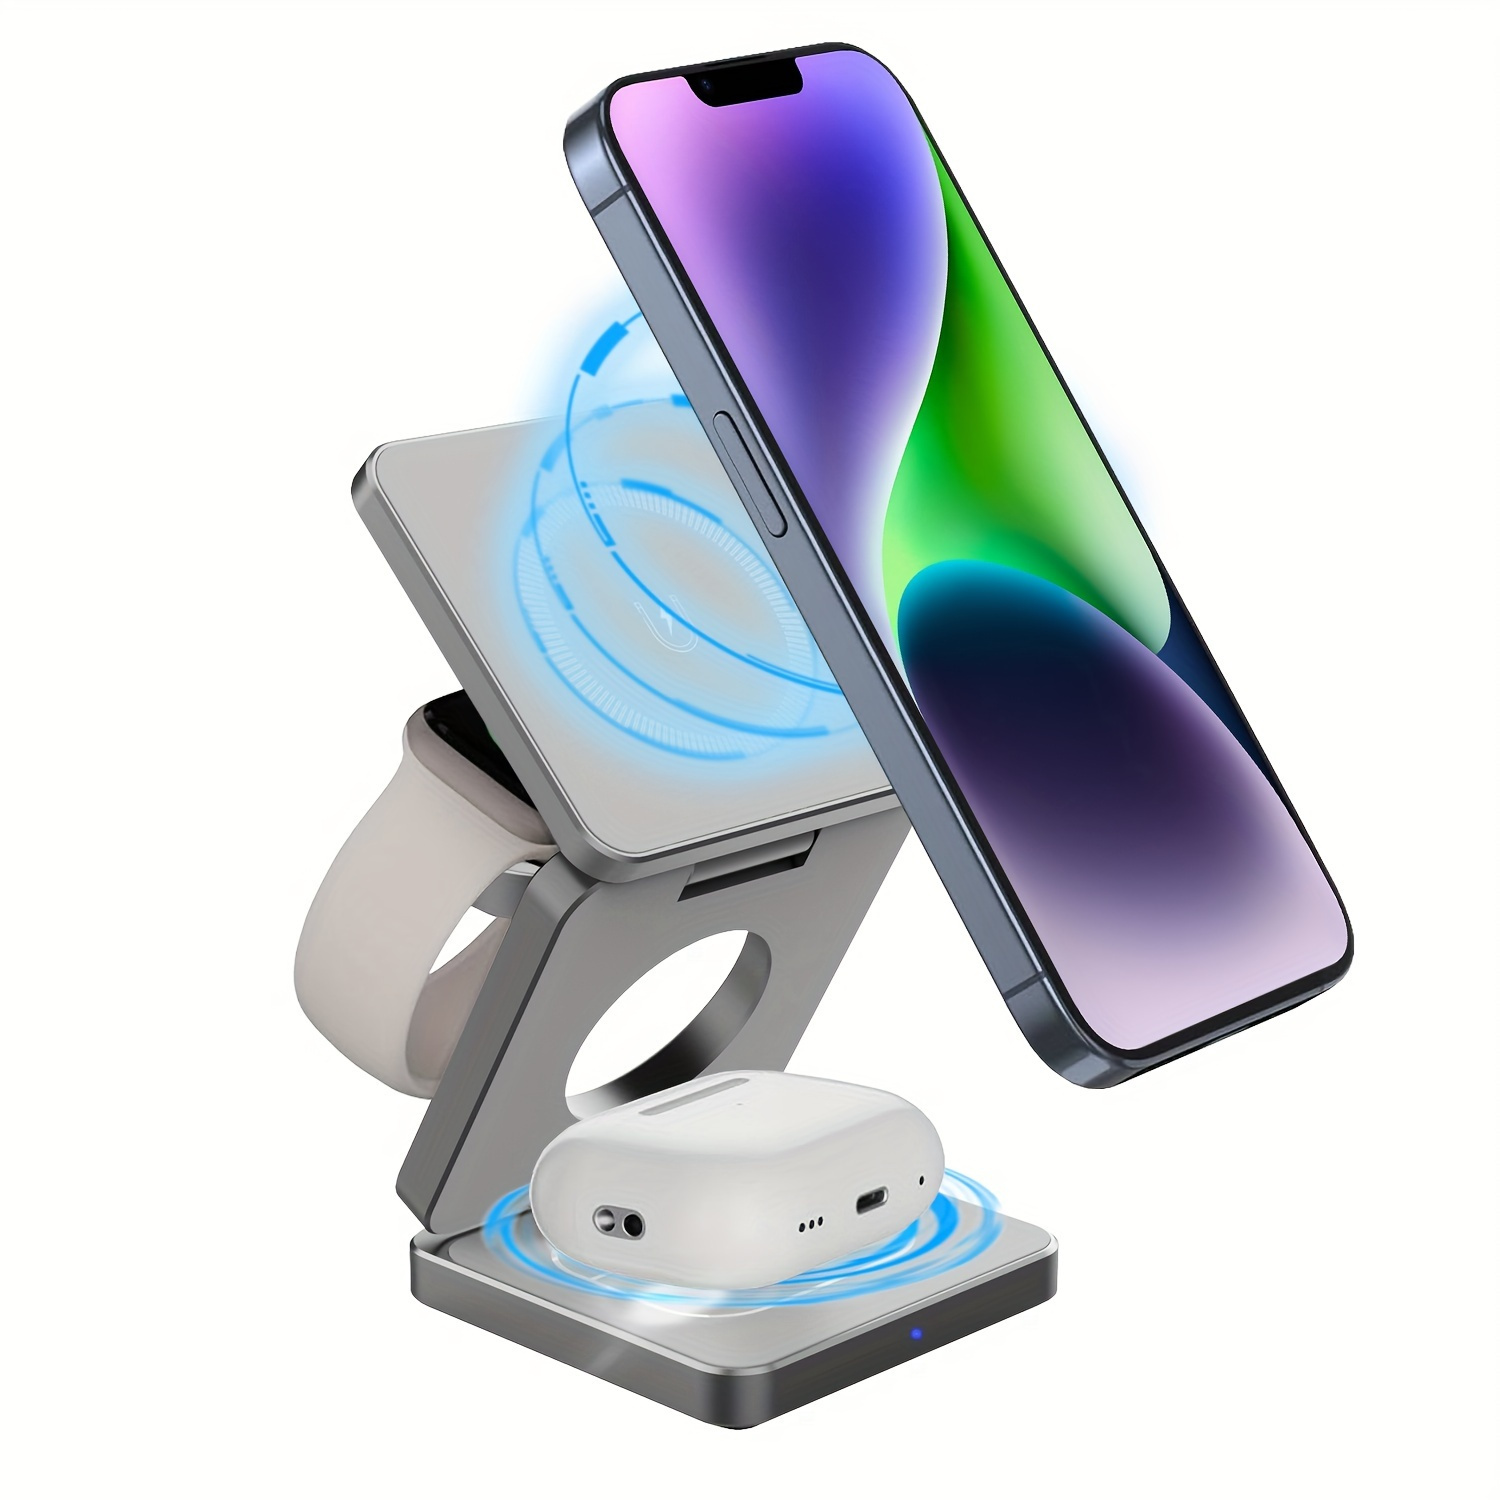 

3-in-1 Magnetic Wireless Charging Station For 15/14/13 Pro Max, Airpods & Watch - Fast Portable Foldable Design With Usb Type-c Cable